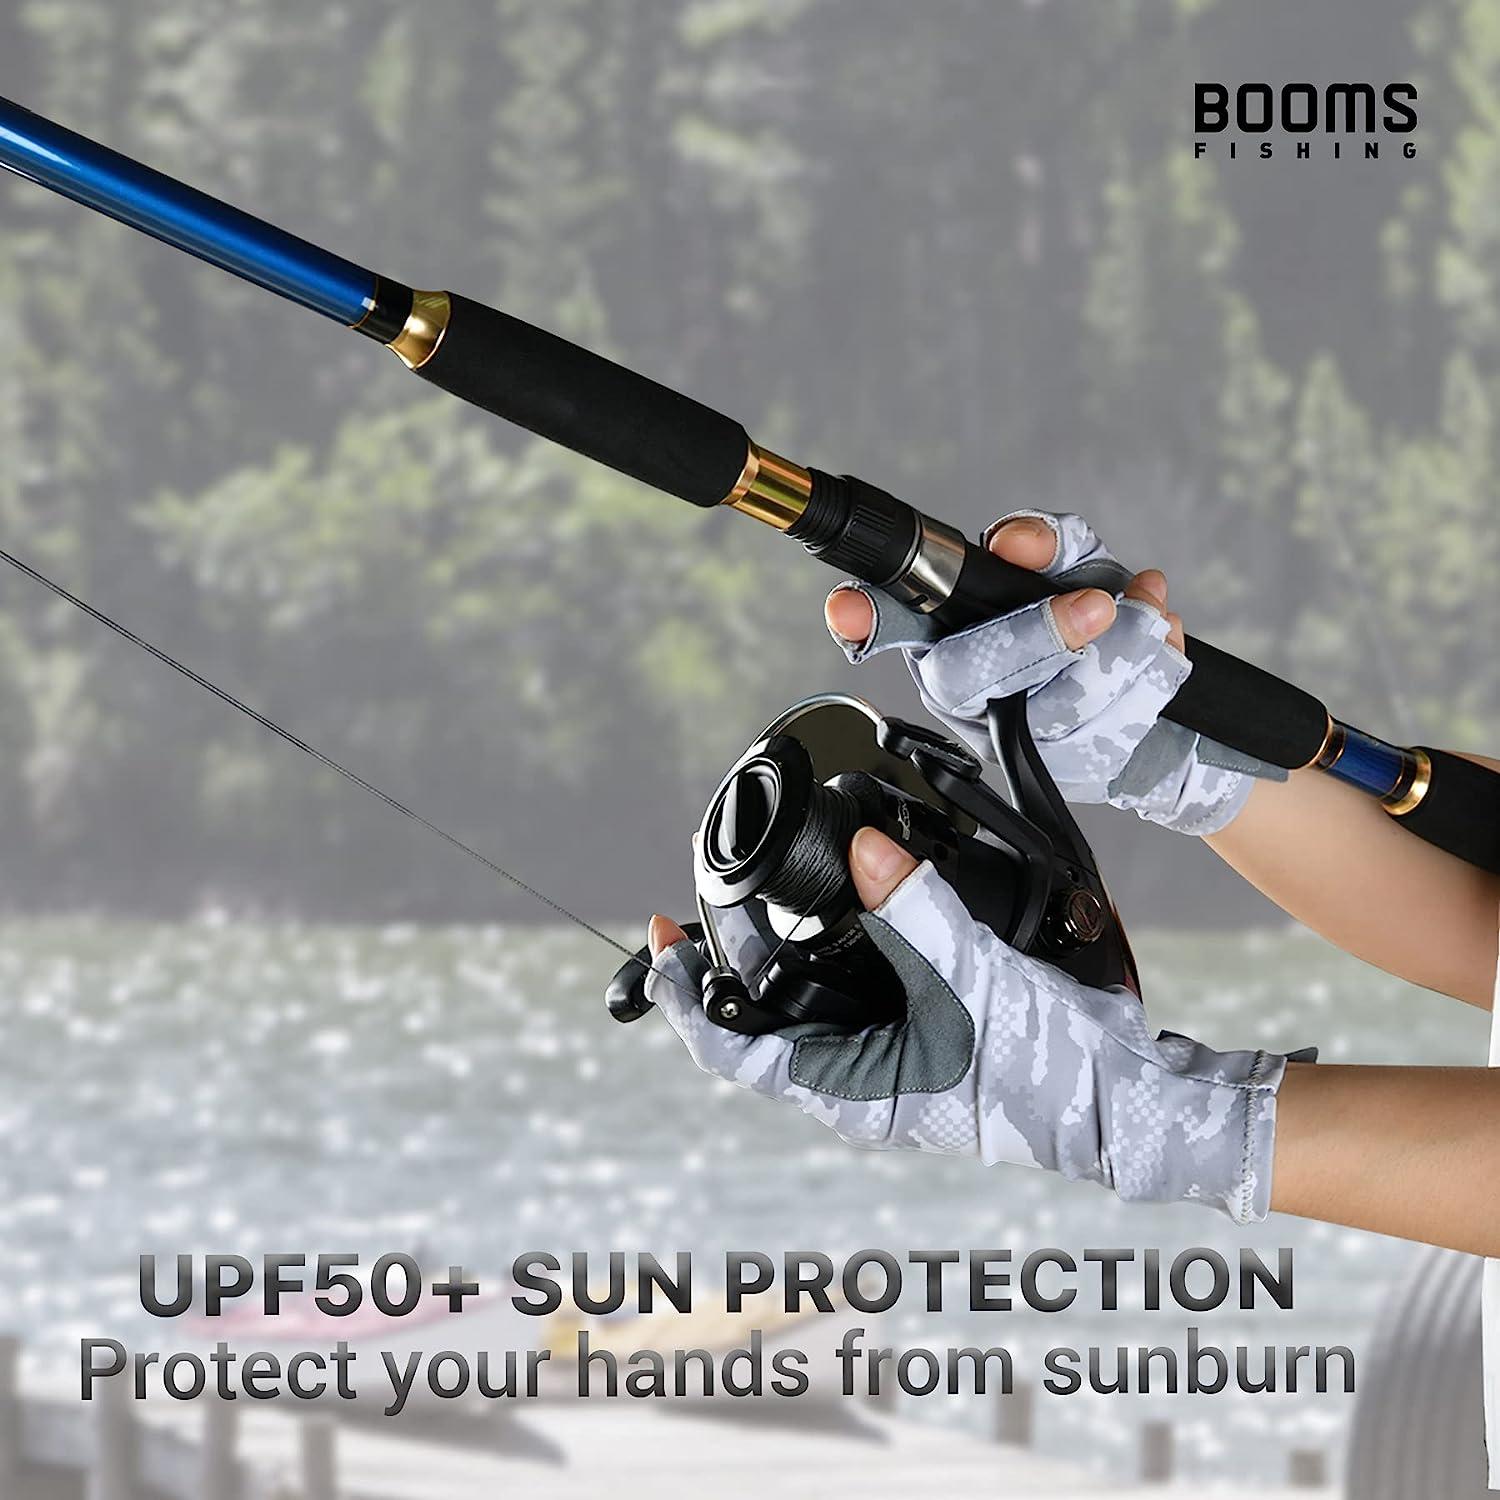 Booms Fishing FG2 Fishing Gloves, UPF50+ Sun Protection Gloves